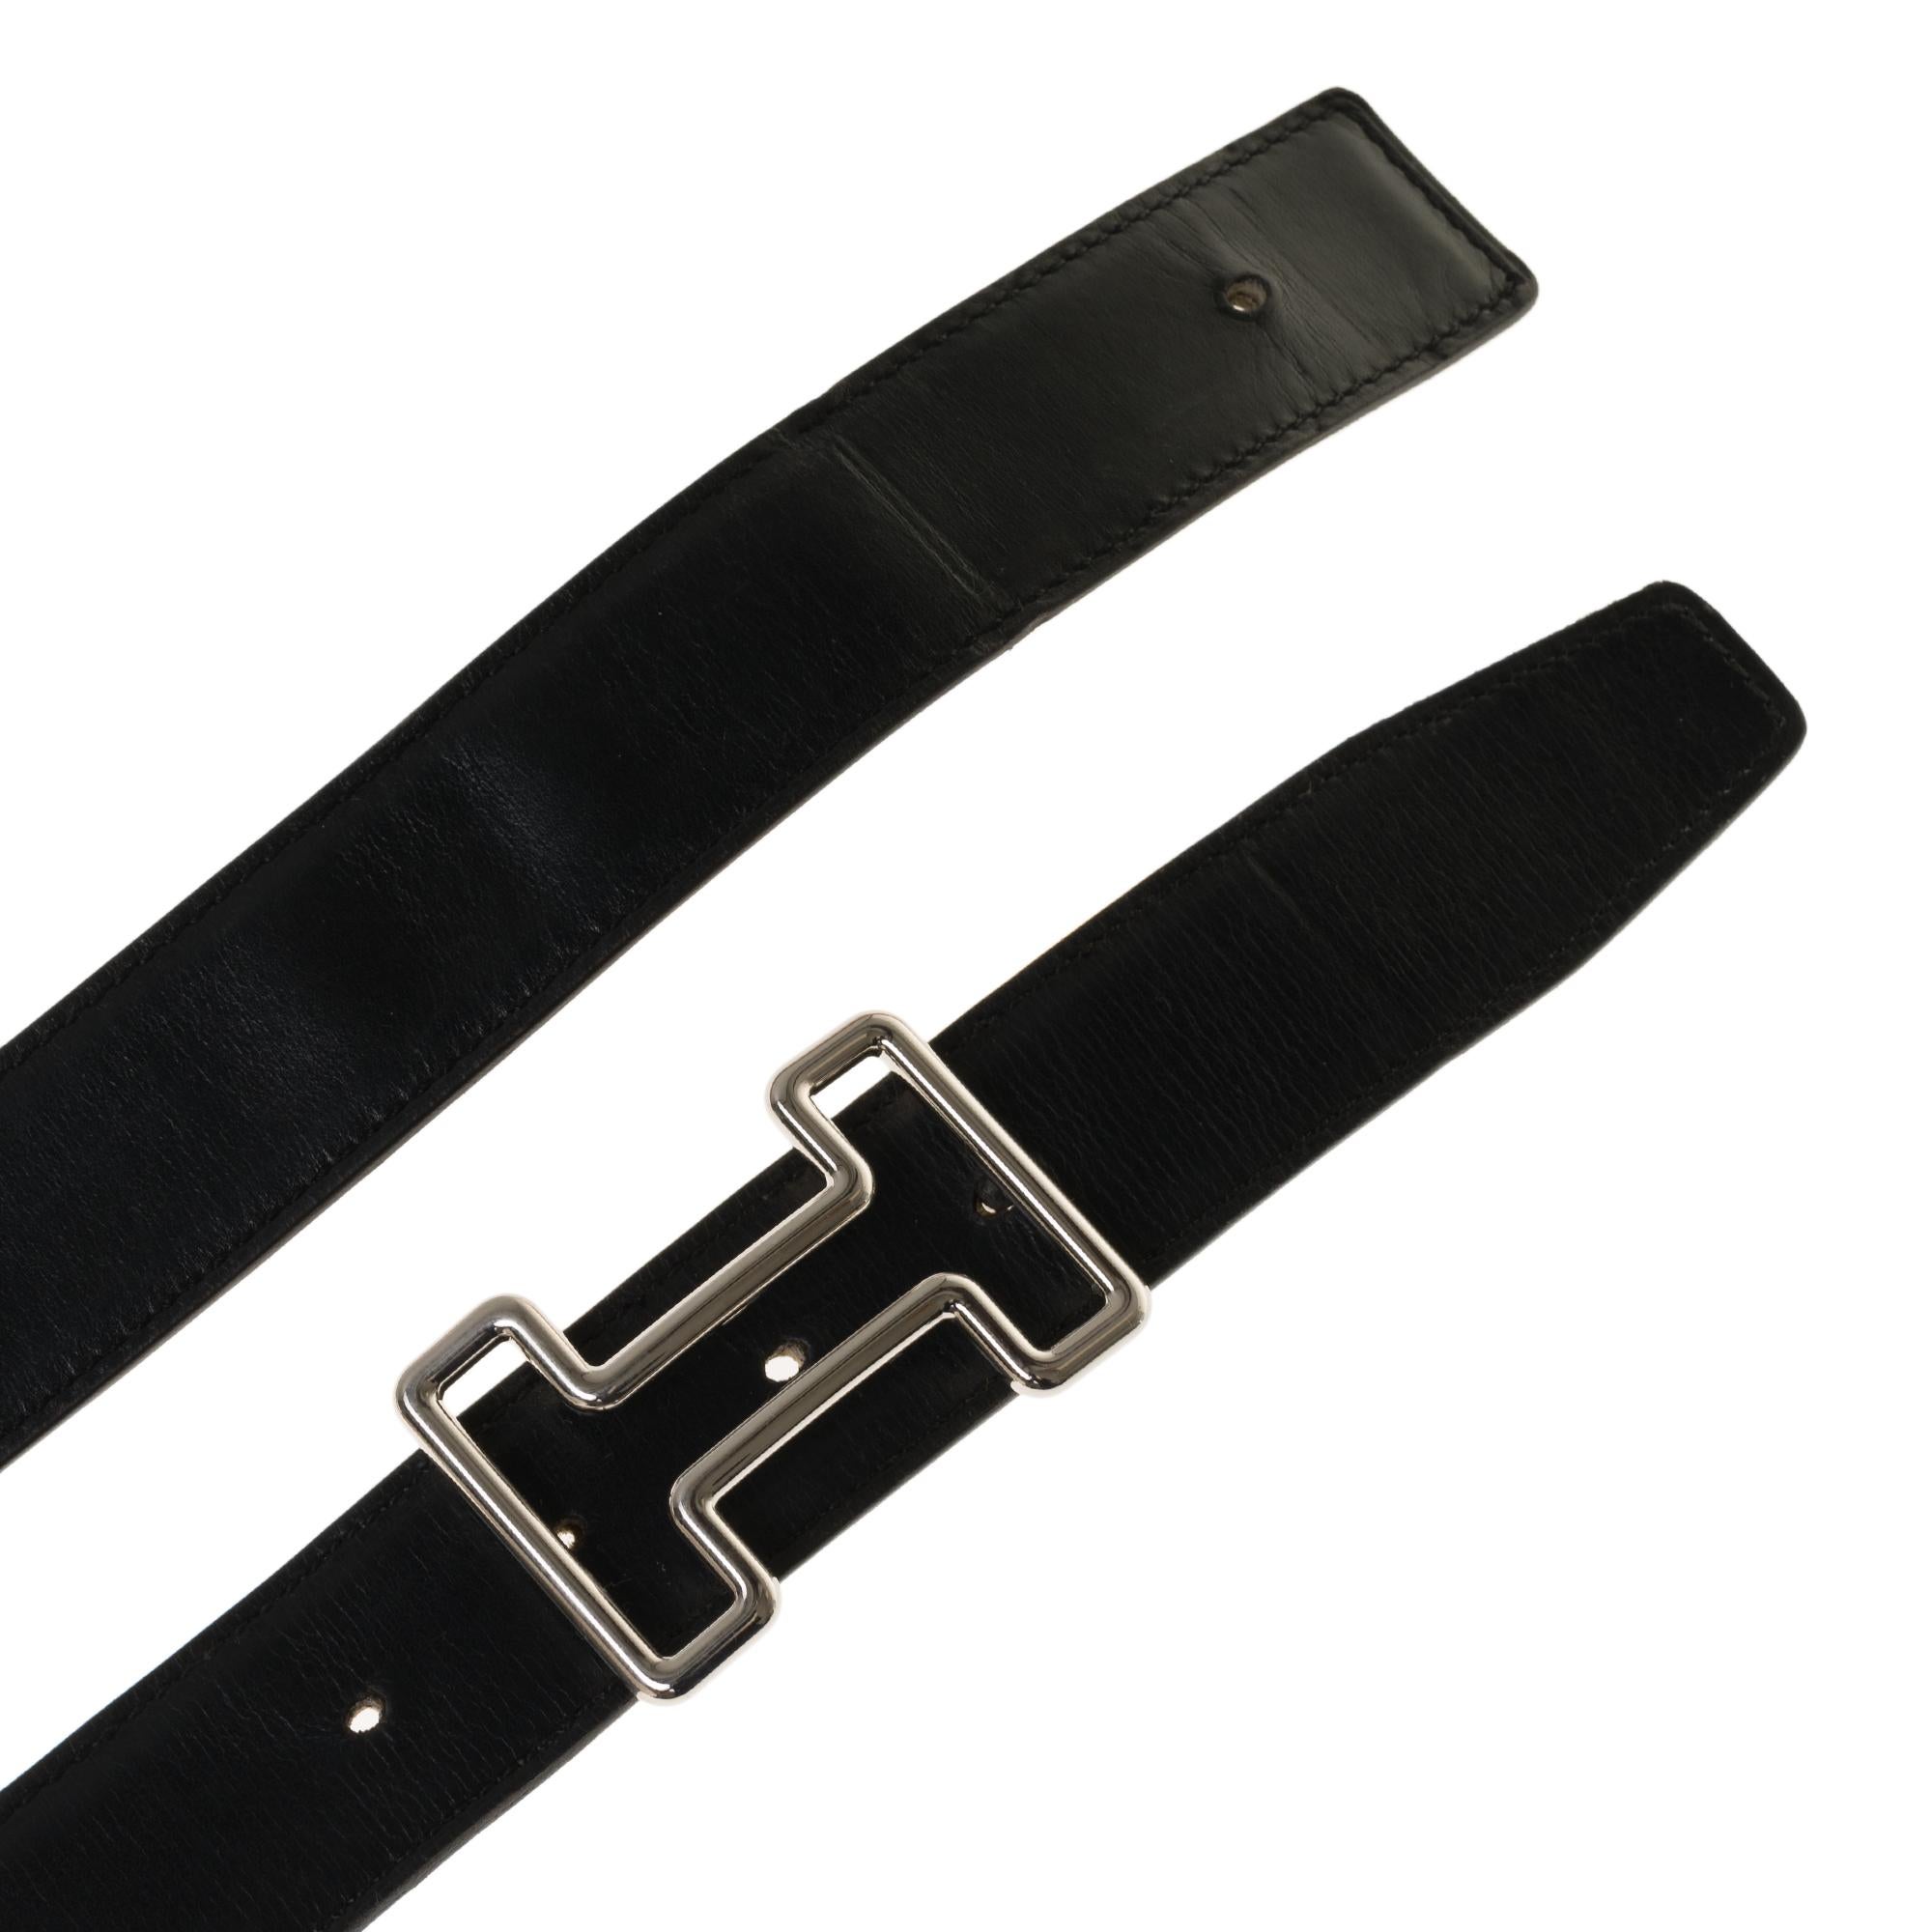 Beautiful Hermès Reverse belt in black leather box & Courchevel gold, 
Tonight palladium-plated metal buckle (Brand new)
Size: 85 cm
Signature: Hermès Paris, Made in France

Dimensions: 3.2 cm * 85 cm
Good vintage condition with wear marks on the